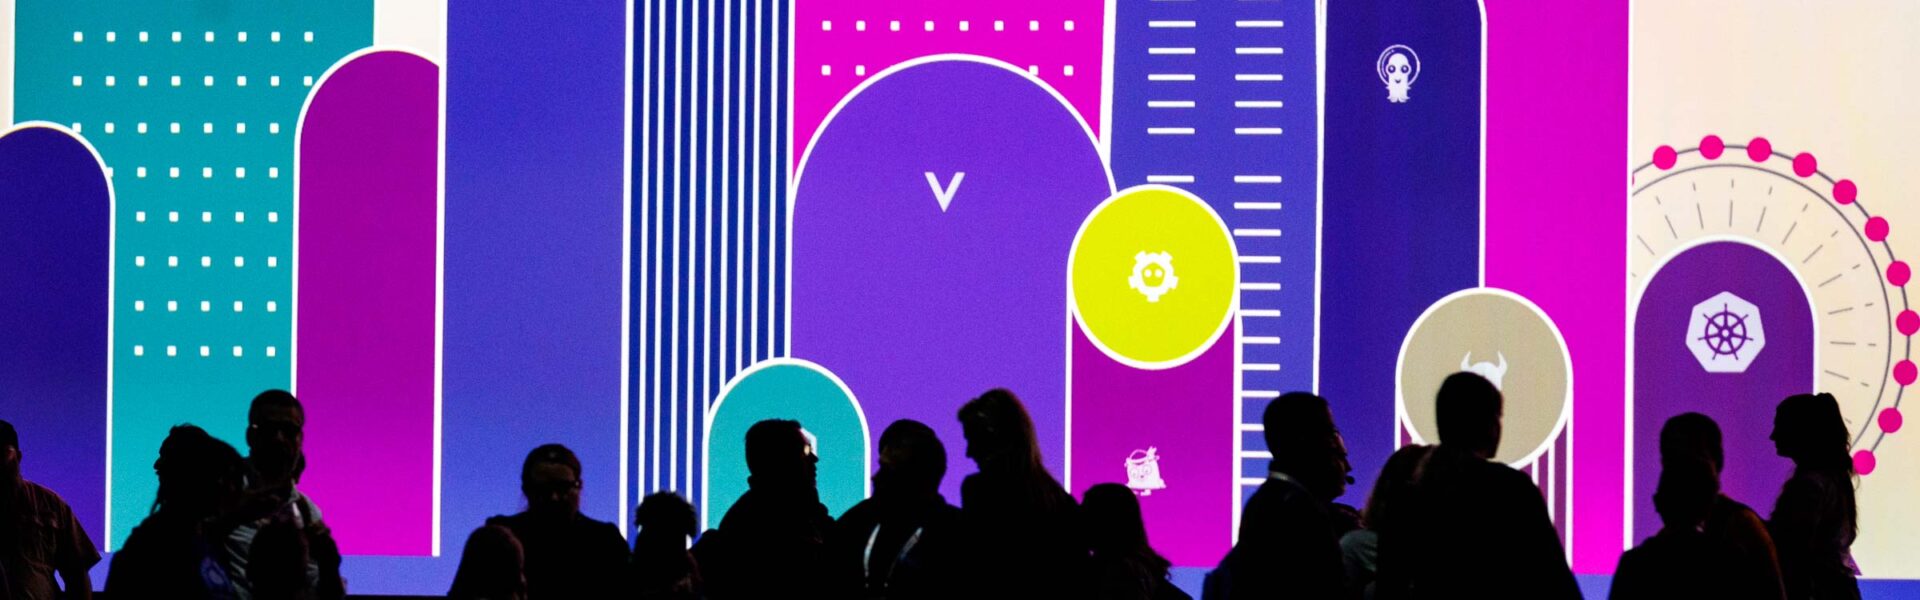 Silhouettes of a crowd moving to their seats in front of a colorful backdrop.